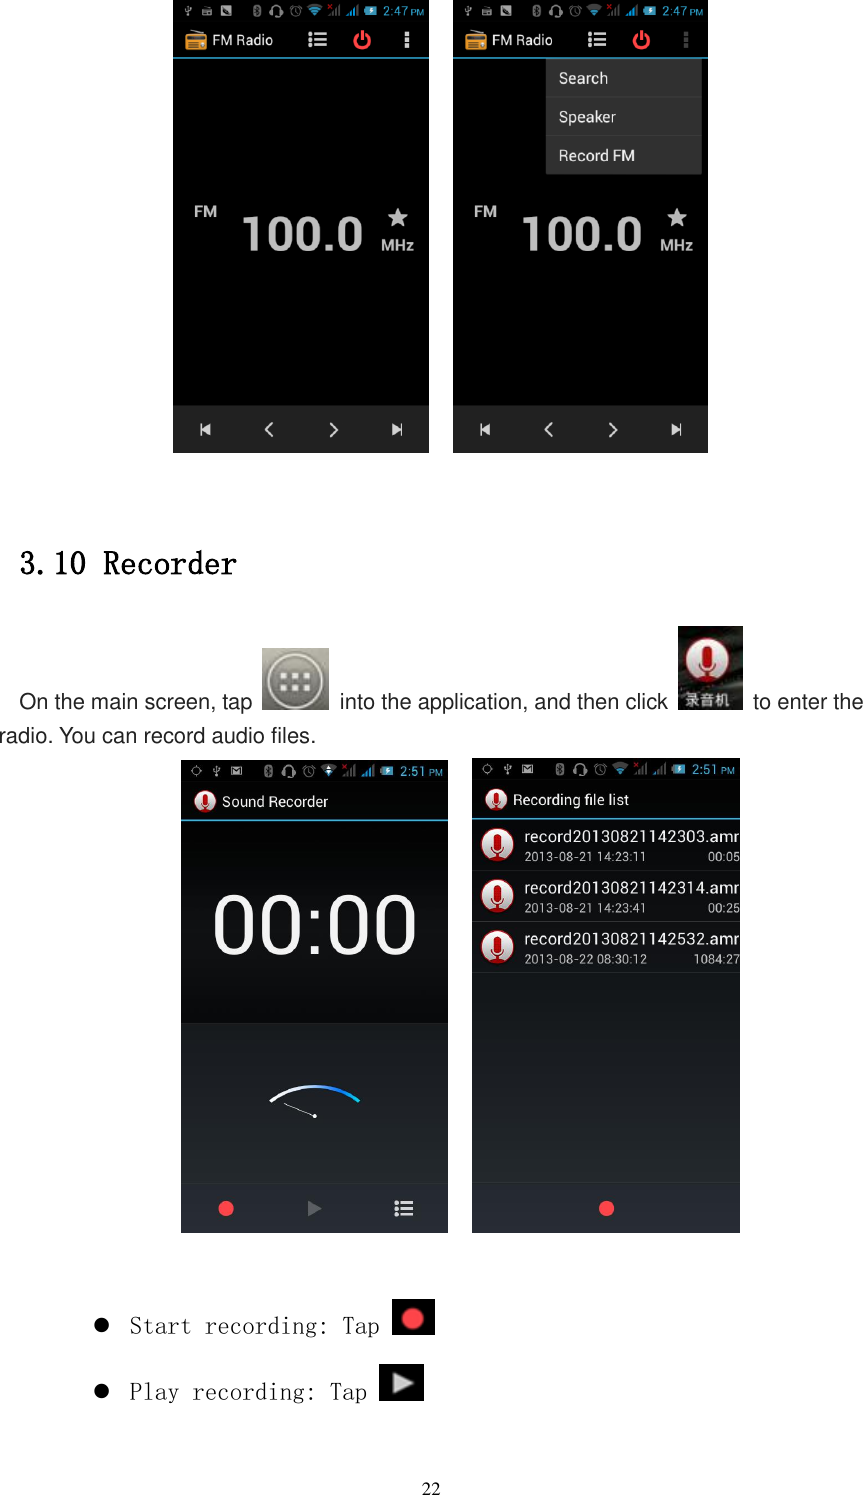   22         3.10 Recorder On the main screen, tap    into the application, and then click    to enter the radio. You can record audio files.          Start recording: Tap    Play recording: Tap   